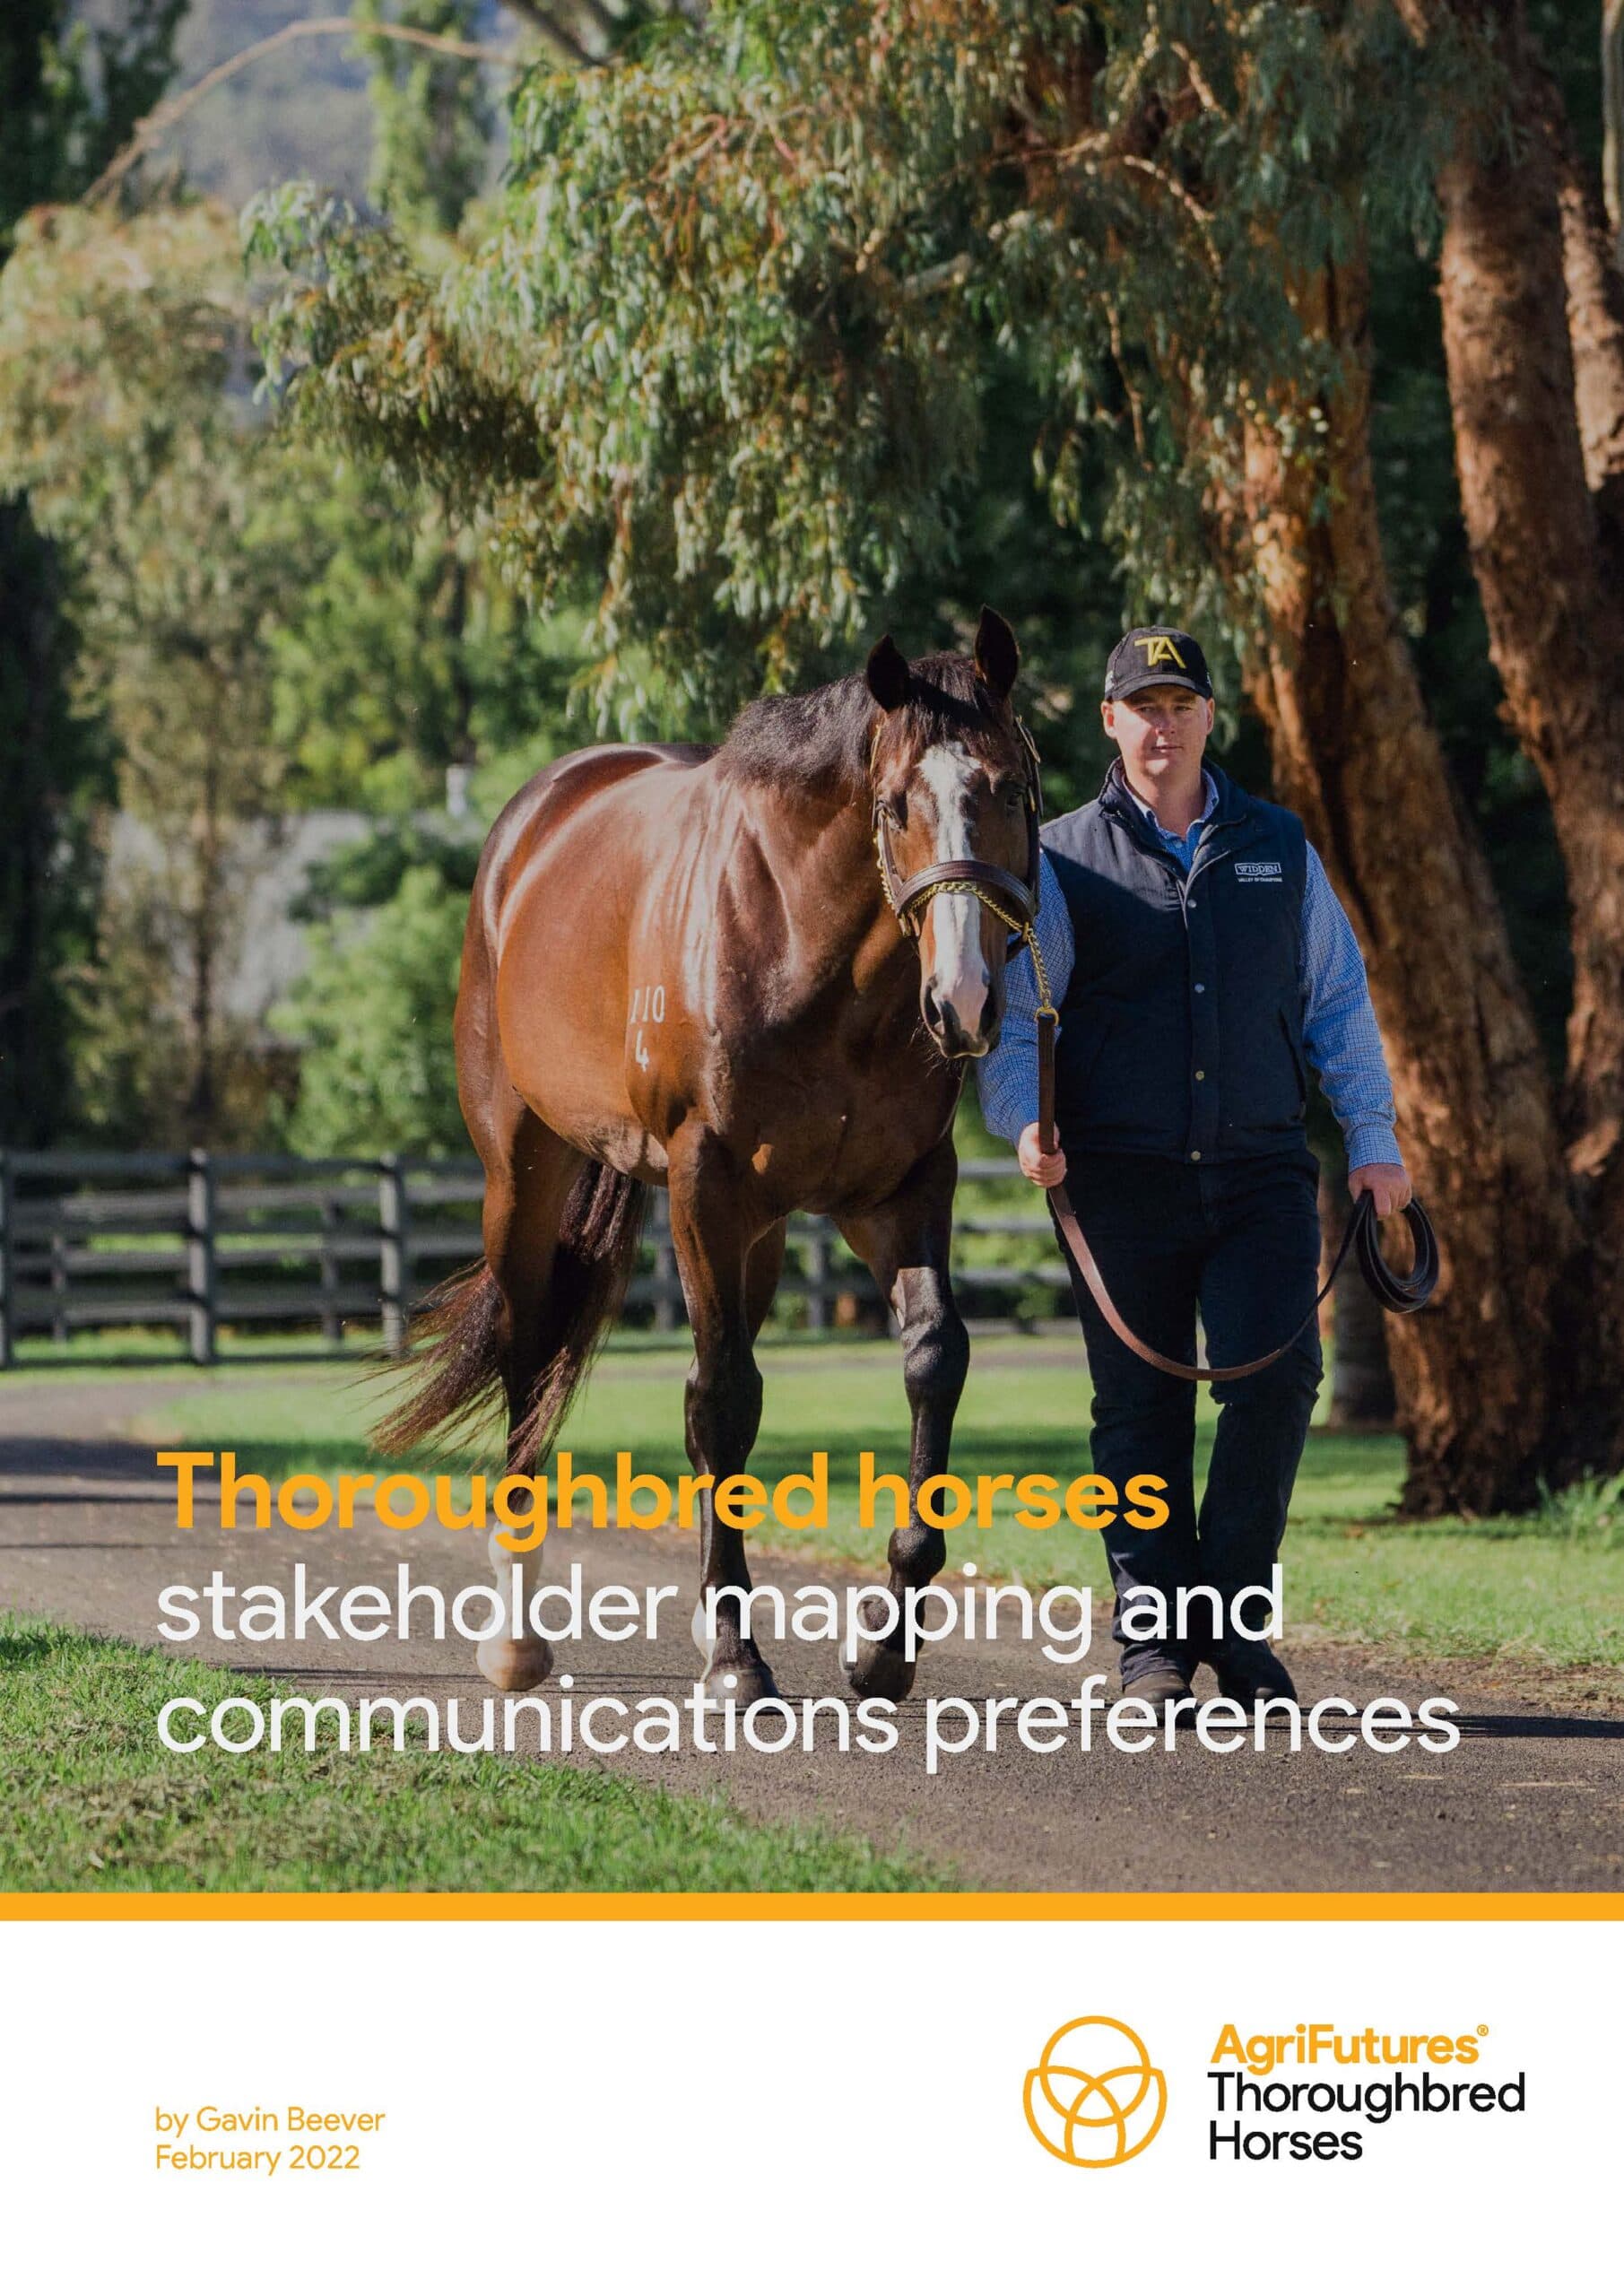 Thoroughbred horses stakeholder mapping and communications preferences - image